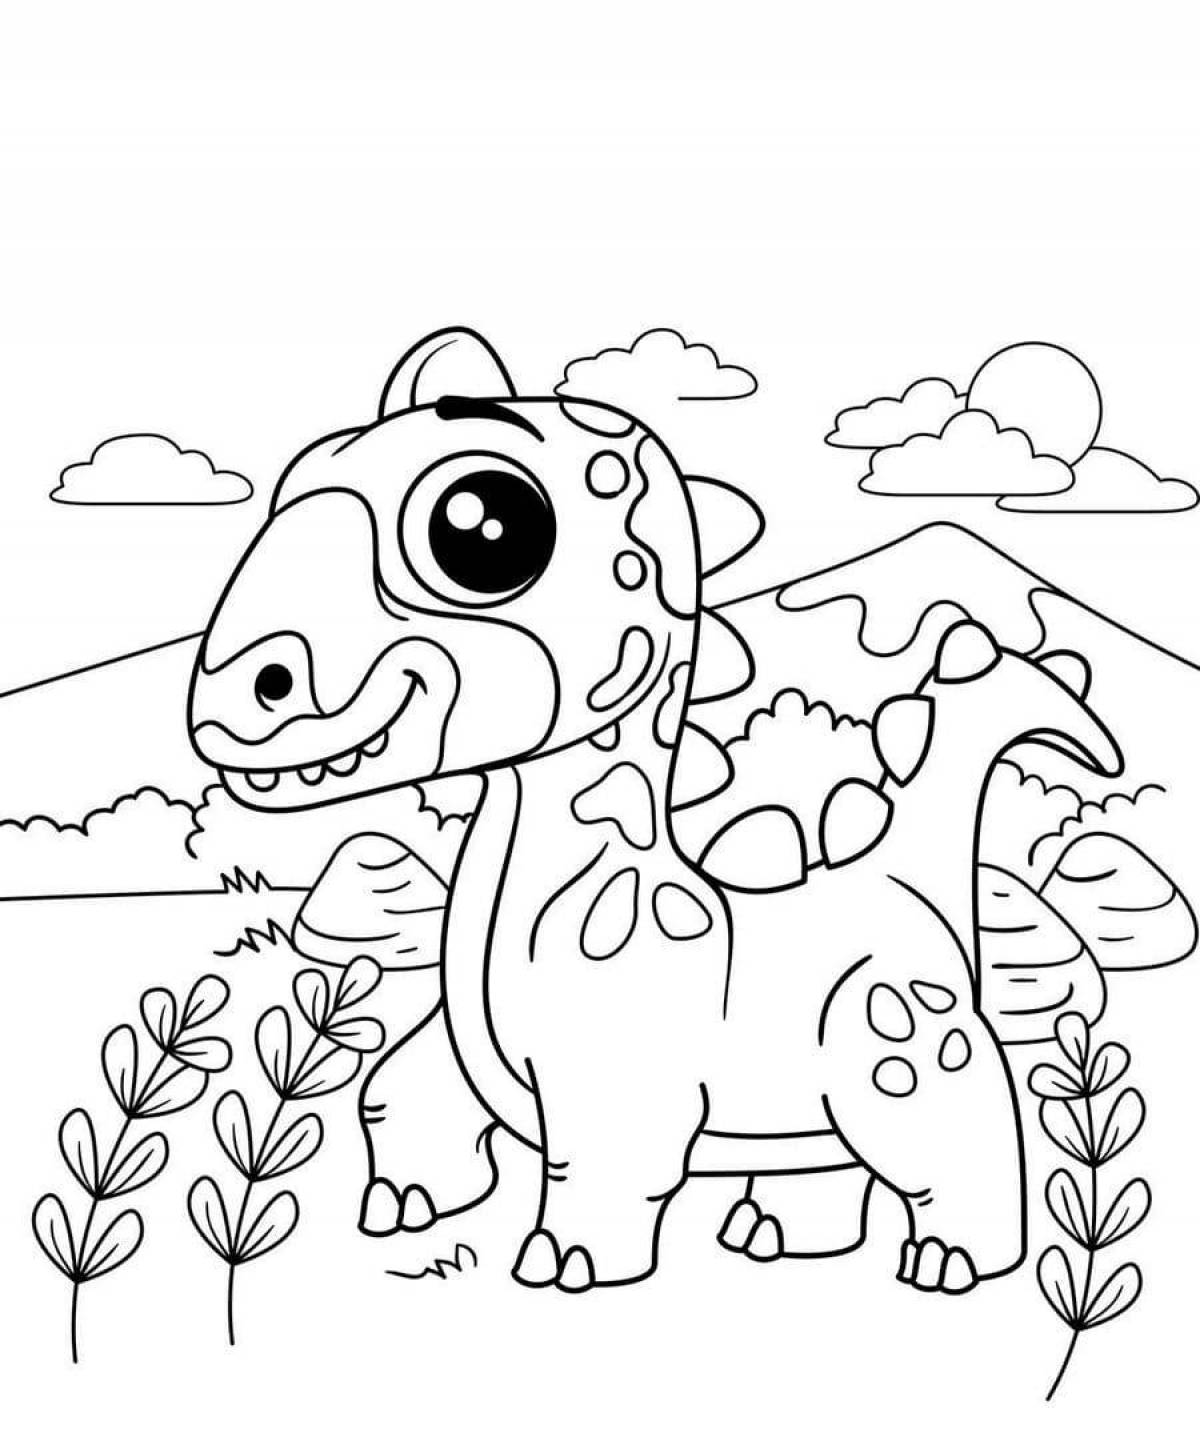 Adorable dinosaur coloring book for 4-5 year olds